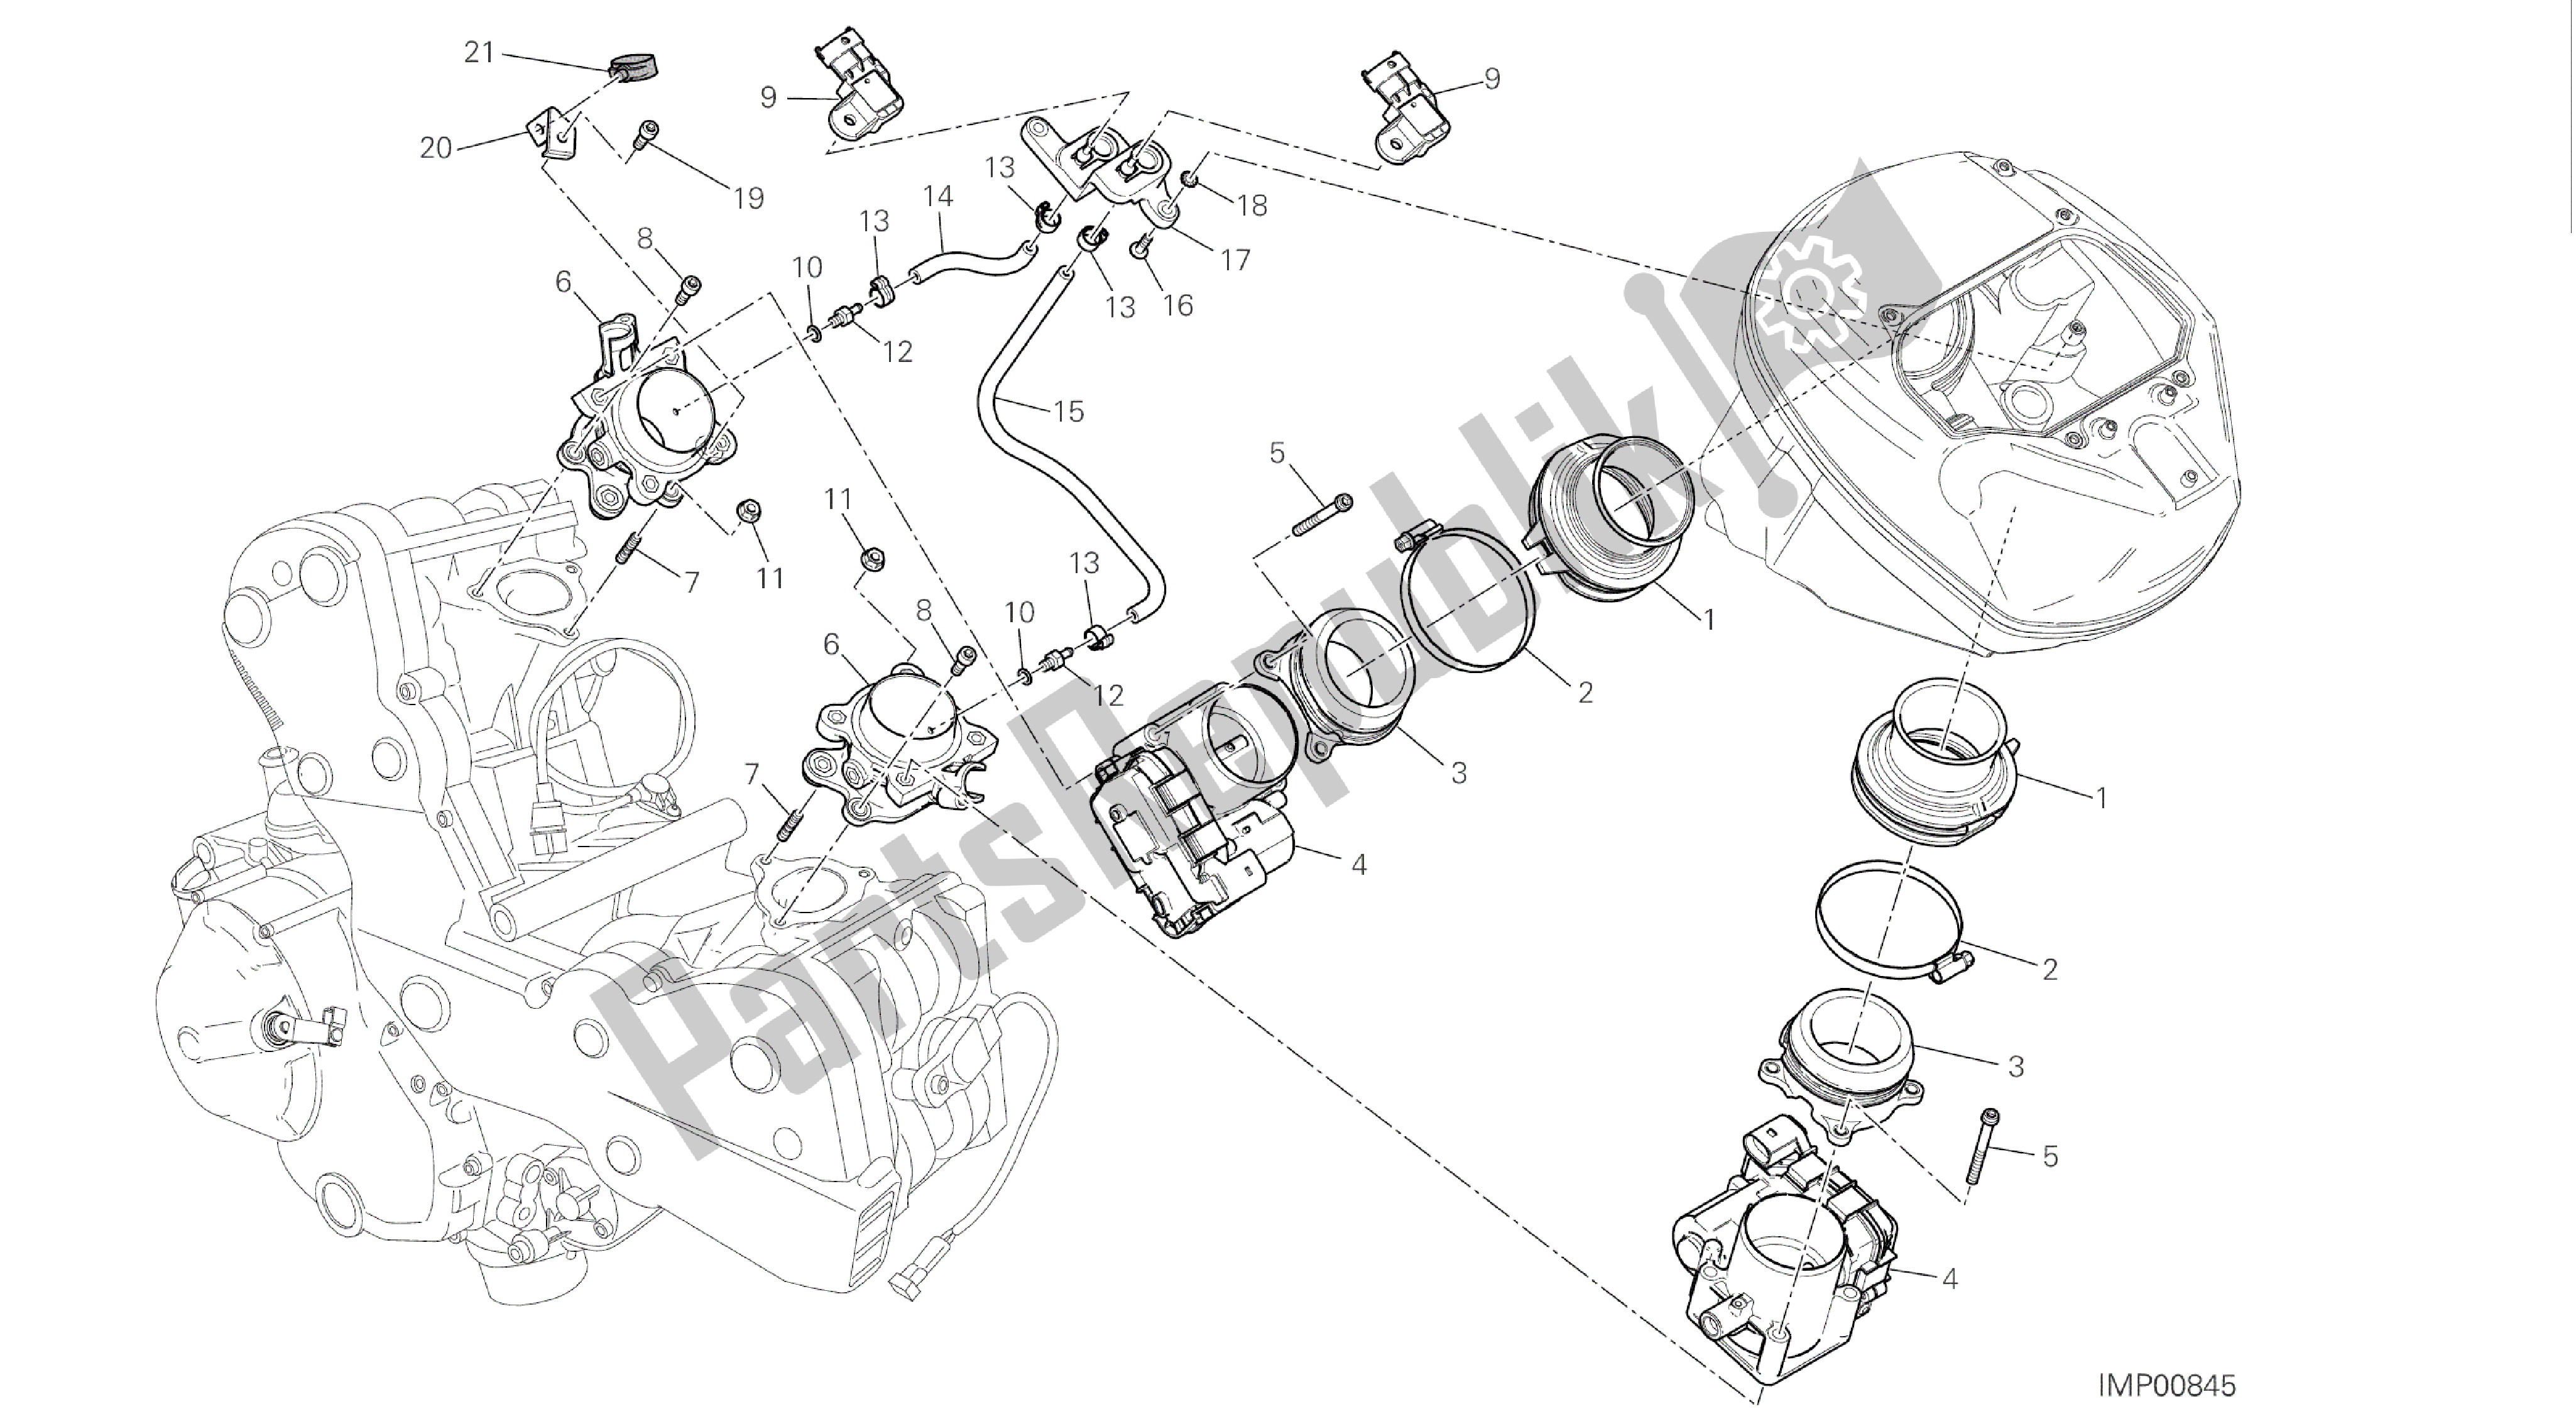 All parts for the Drawing 016 - Throttle Body [mod:hyp Str;xst:twn]group Frame of the Ducati Hypermotard 821 2015